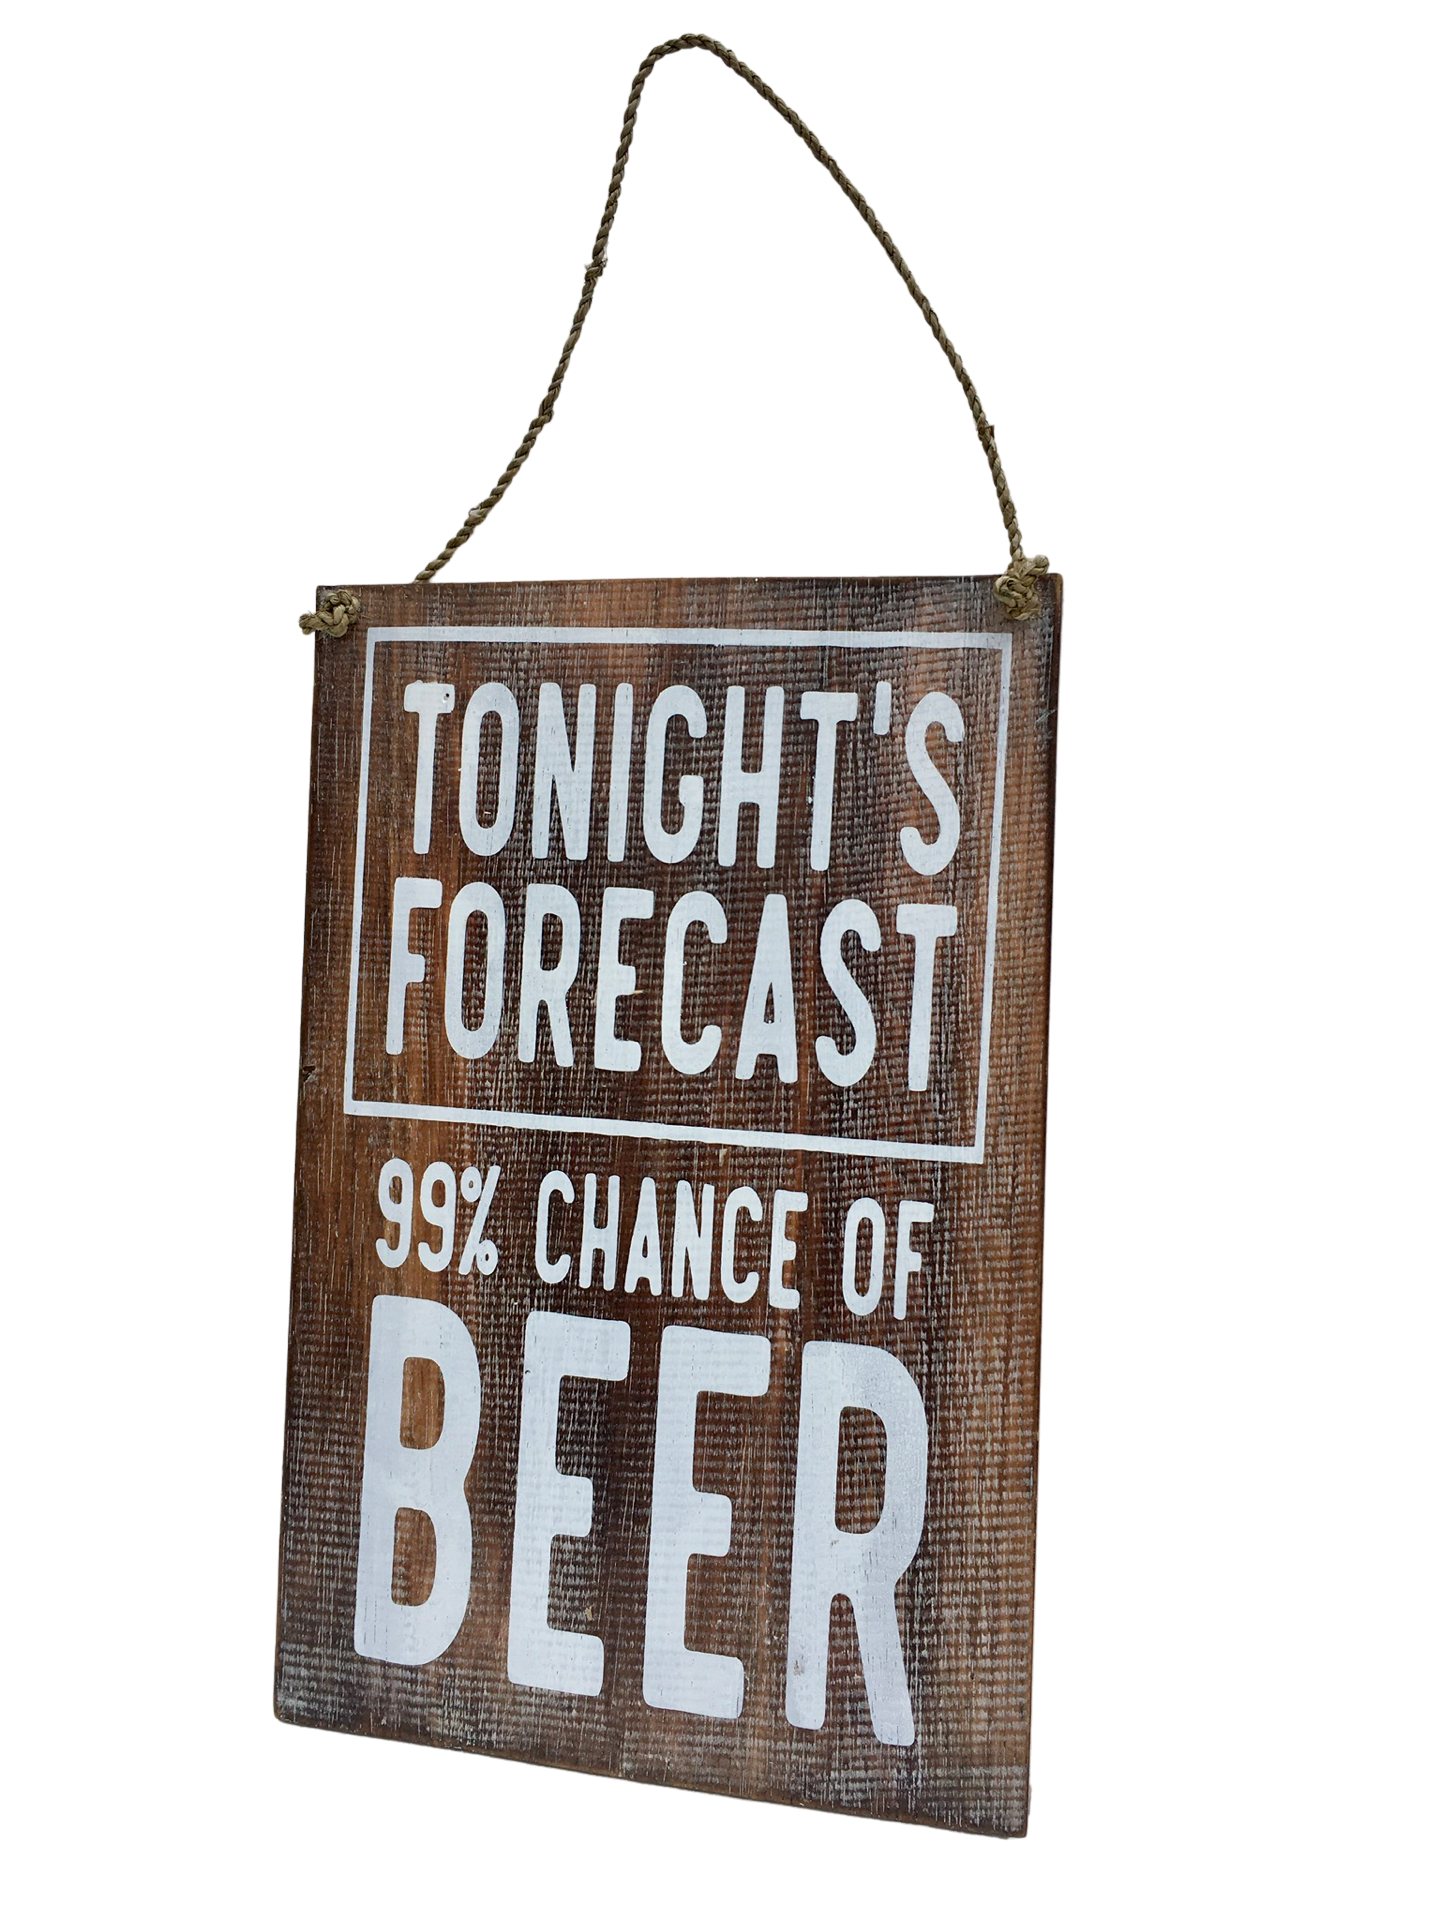 A brown wooden sign that says - Tonight's forecast, 99% chance of beer'. 